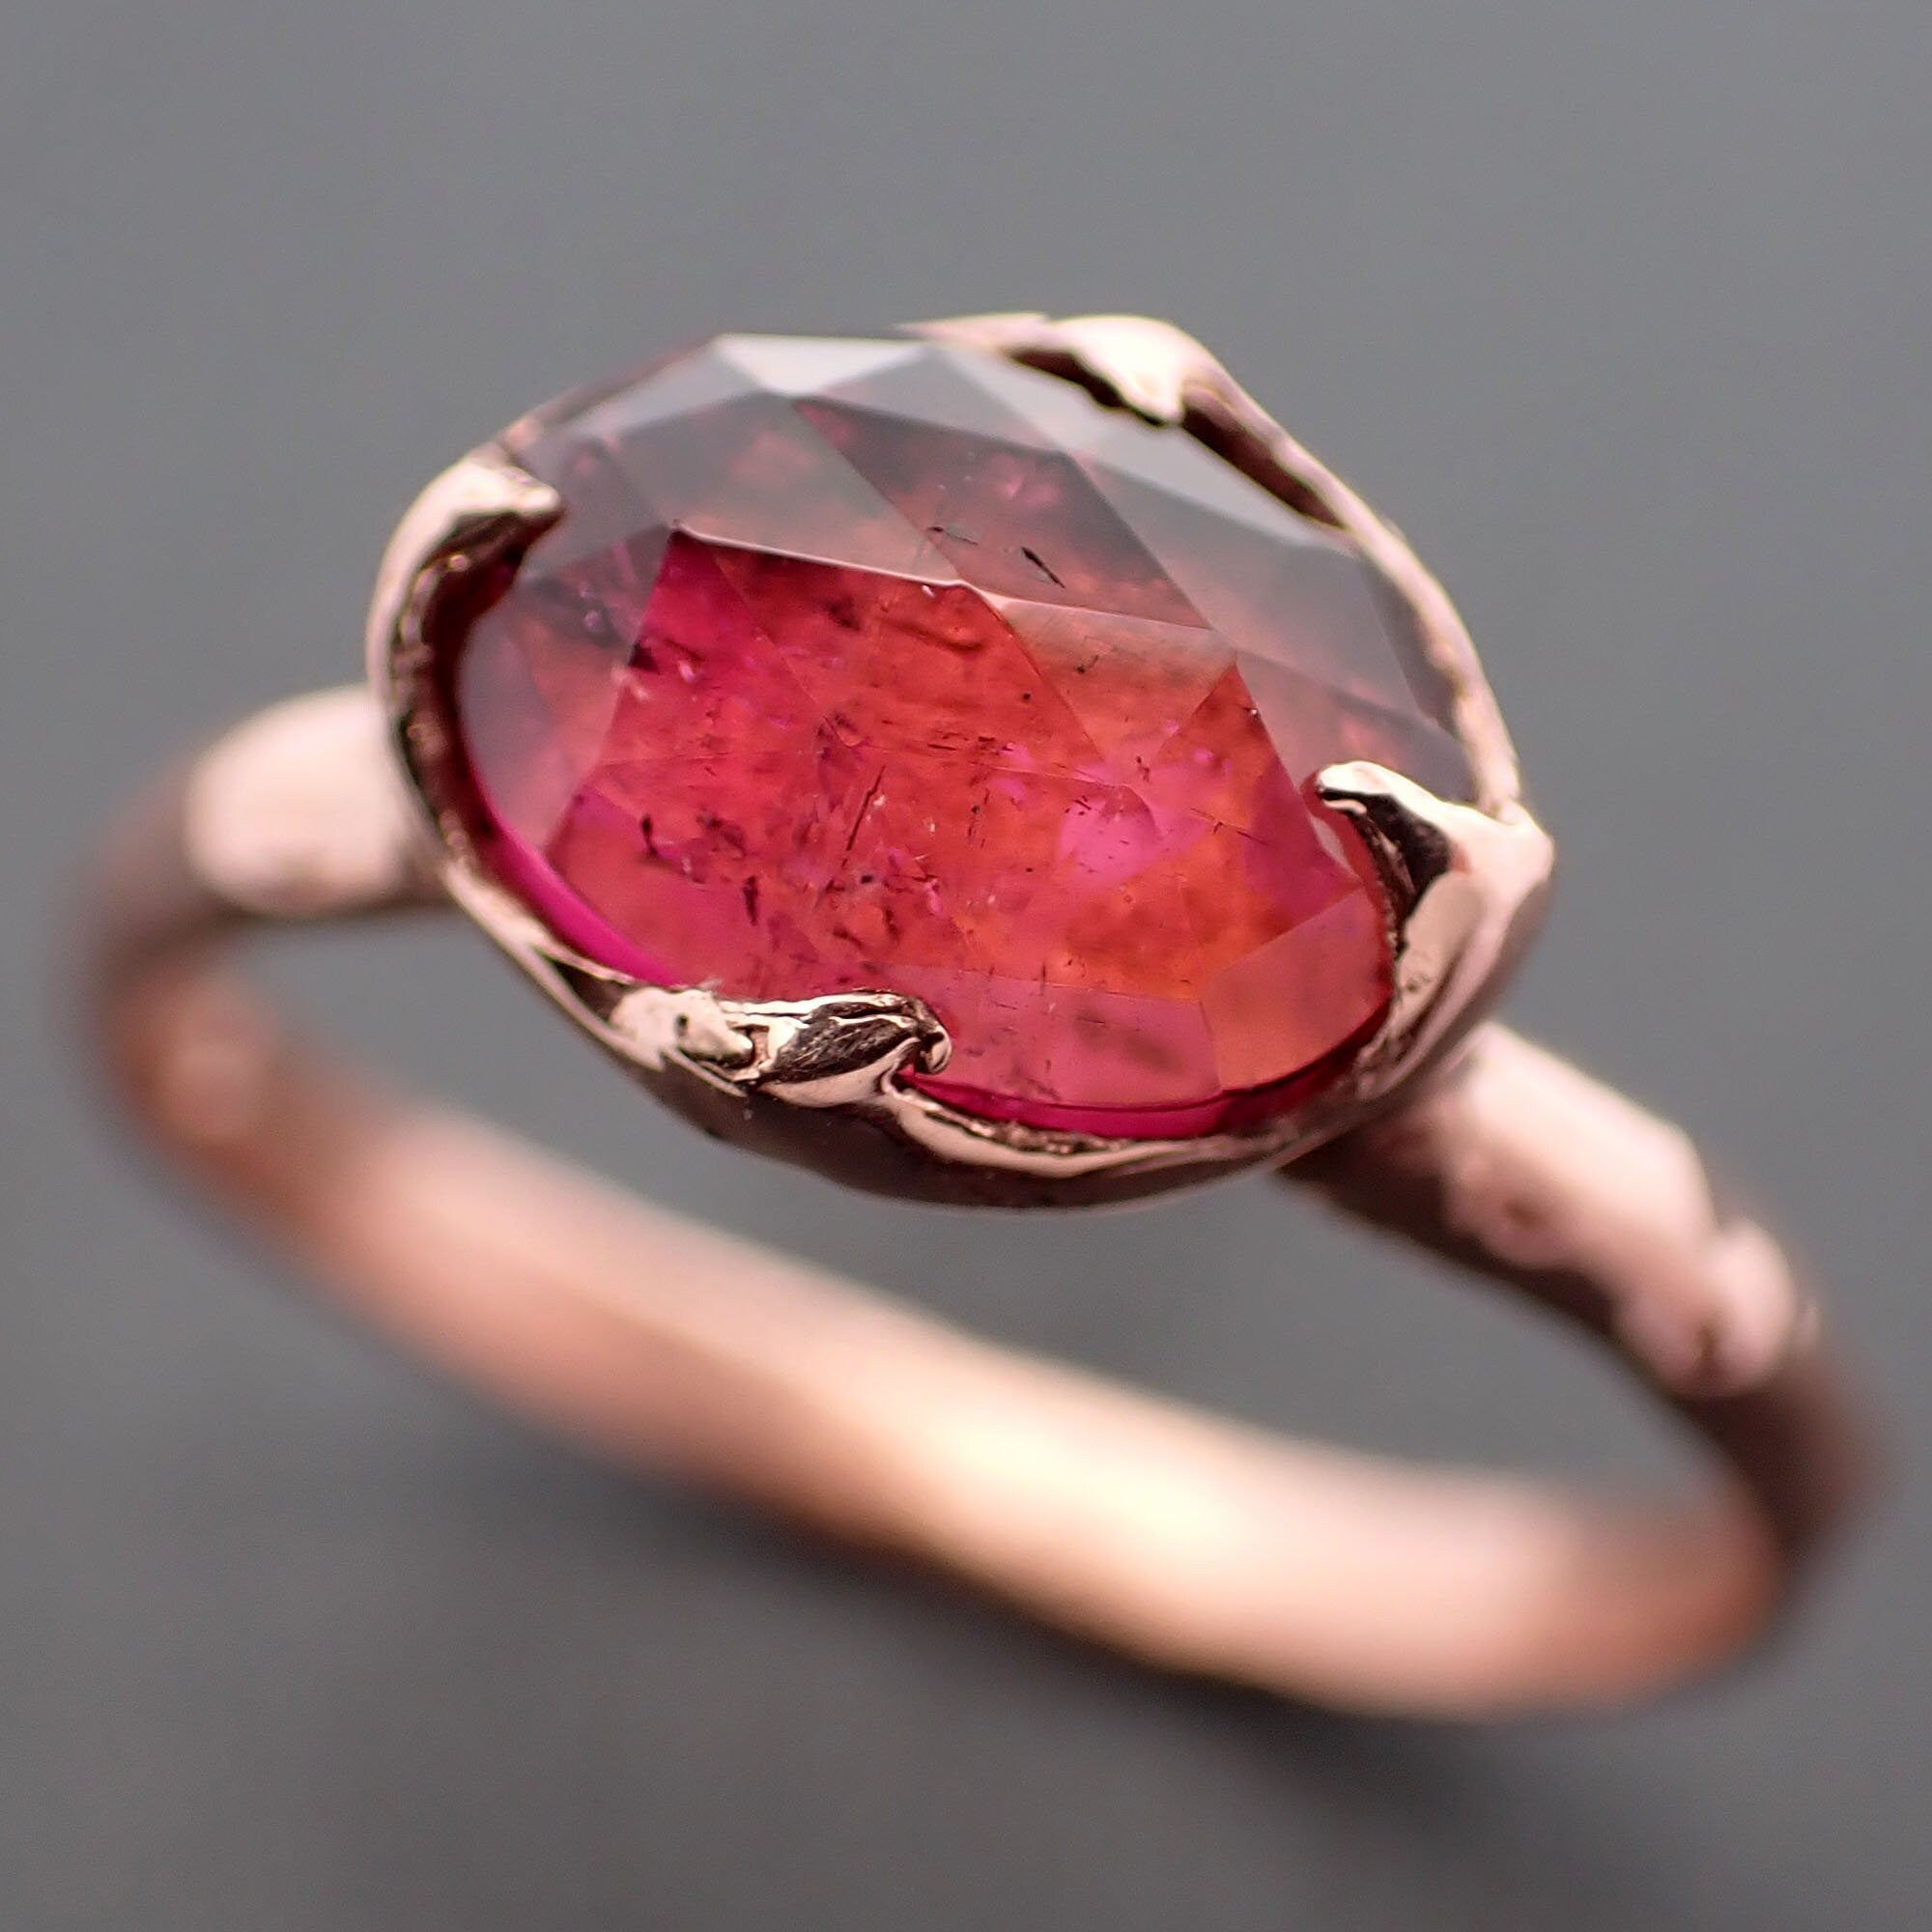 Fancy cut red Tourmaline Rose Gold Ring Gemstone Solitaire recycled 14k statement cocktail statement 3339